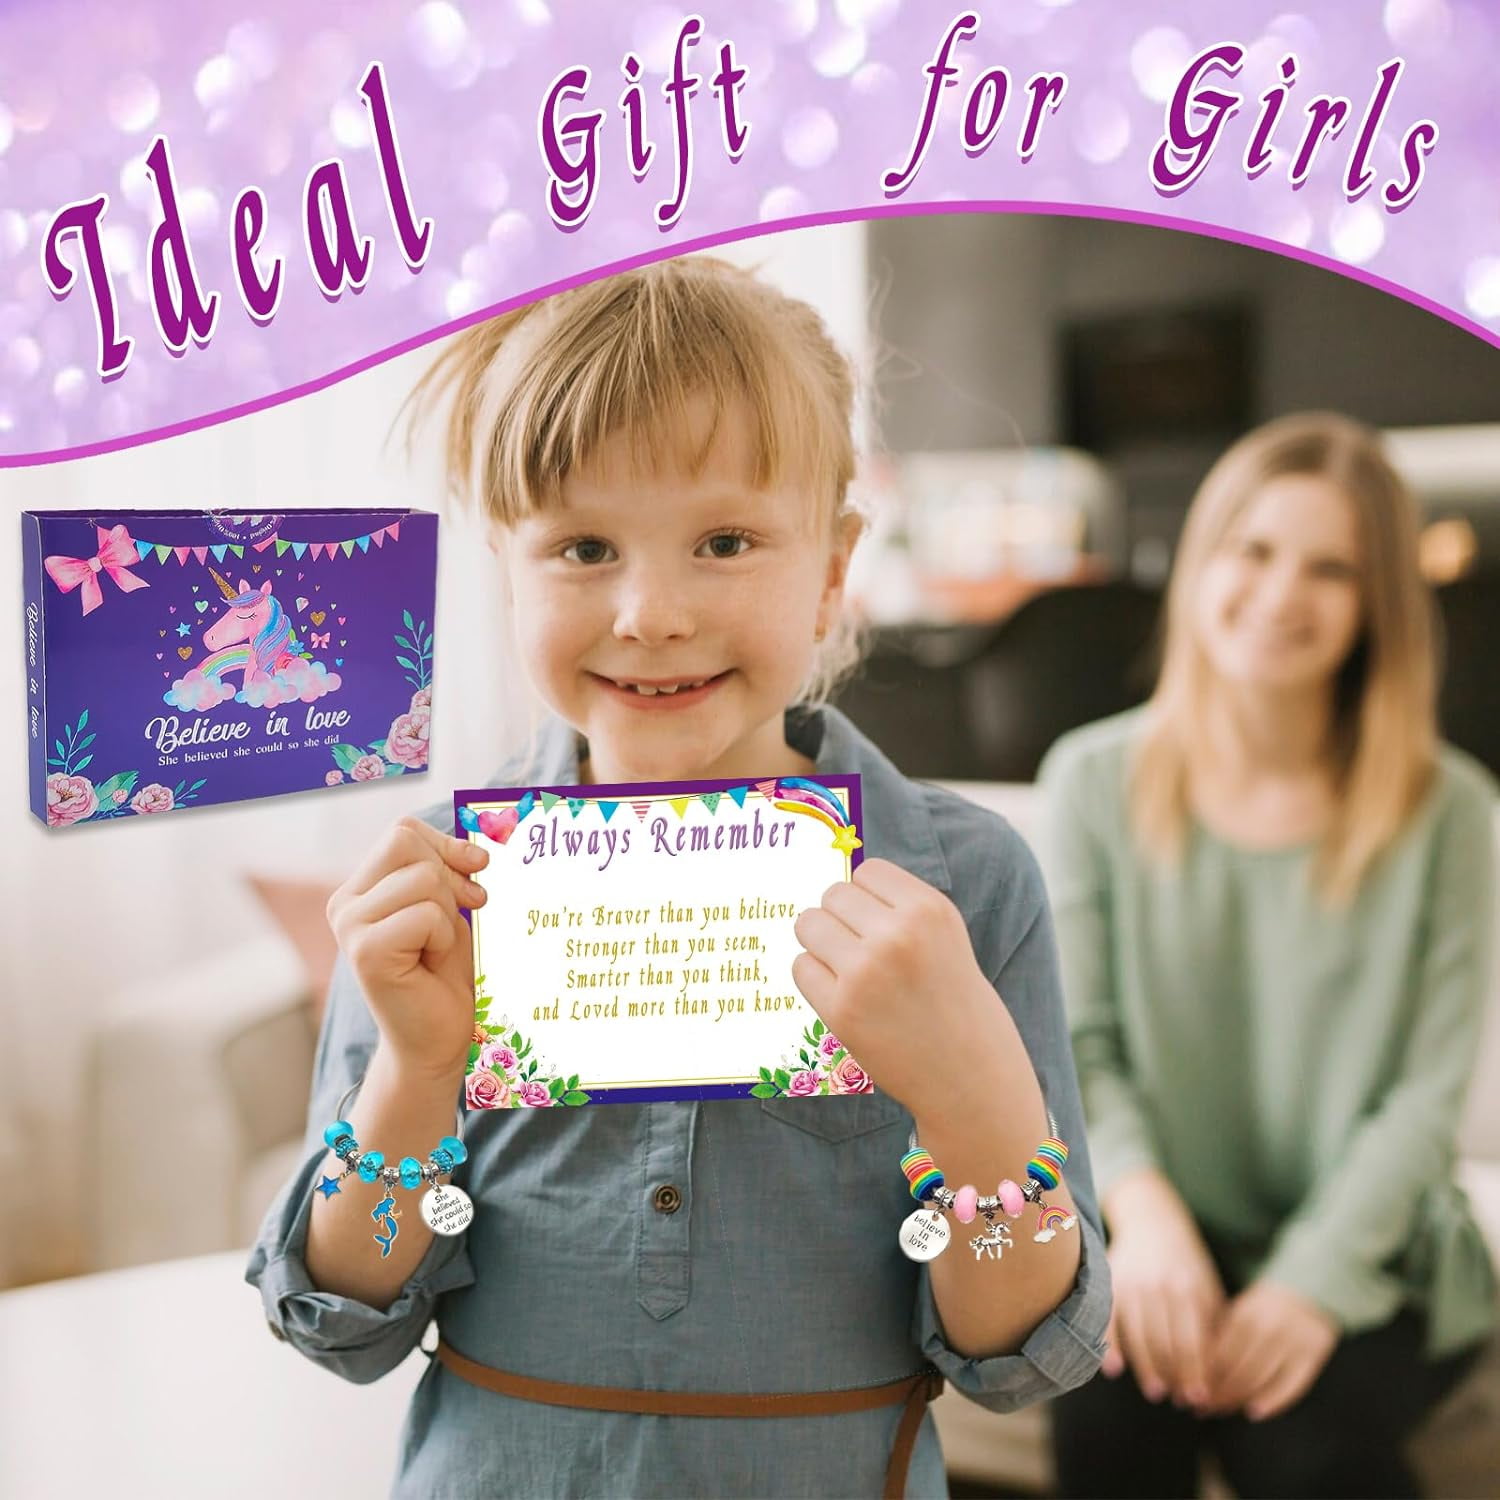  DIVAS MODE Charm Bracelet Making Kit, Unicorn/Mermaid Crafts  for Girls Age 6-8, Jewelry Making Beads and Supplies : Toys & Games